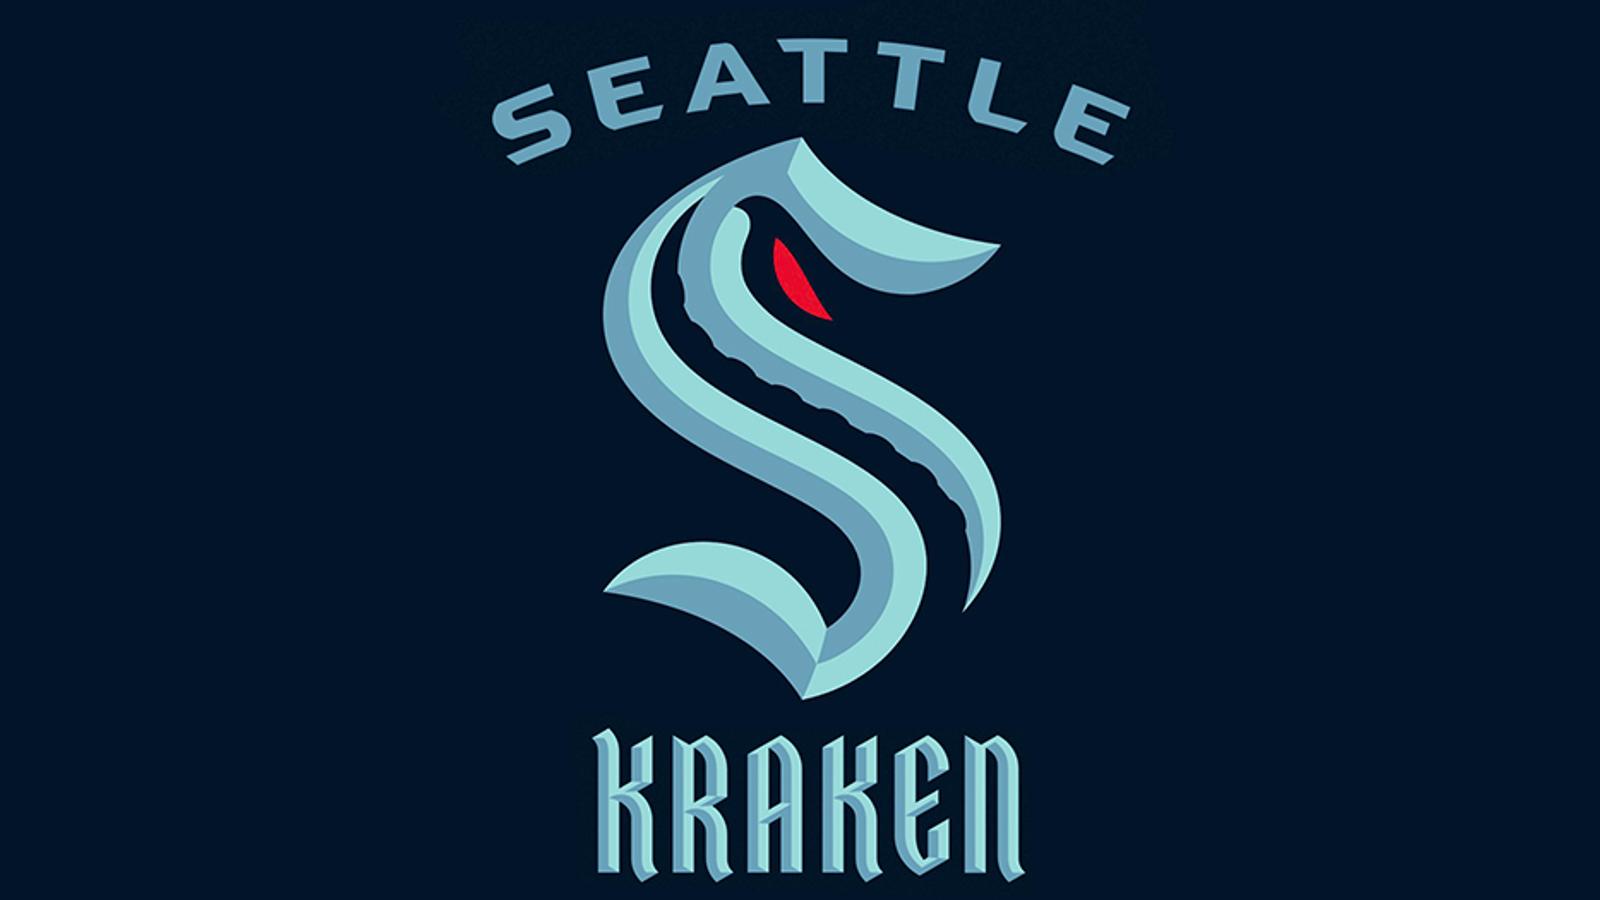 A complete list of all the Seattle Kraken's expansion picks